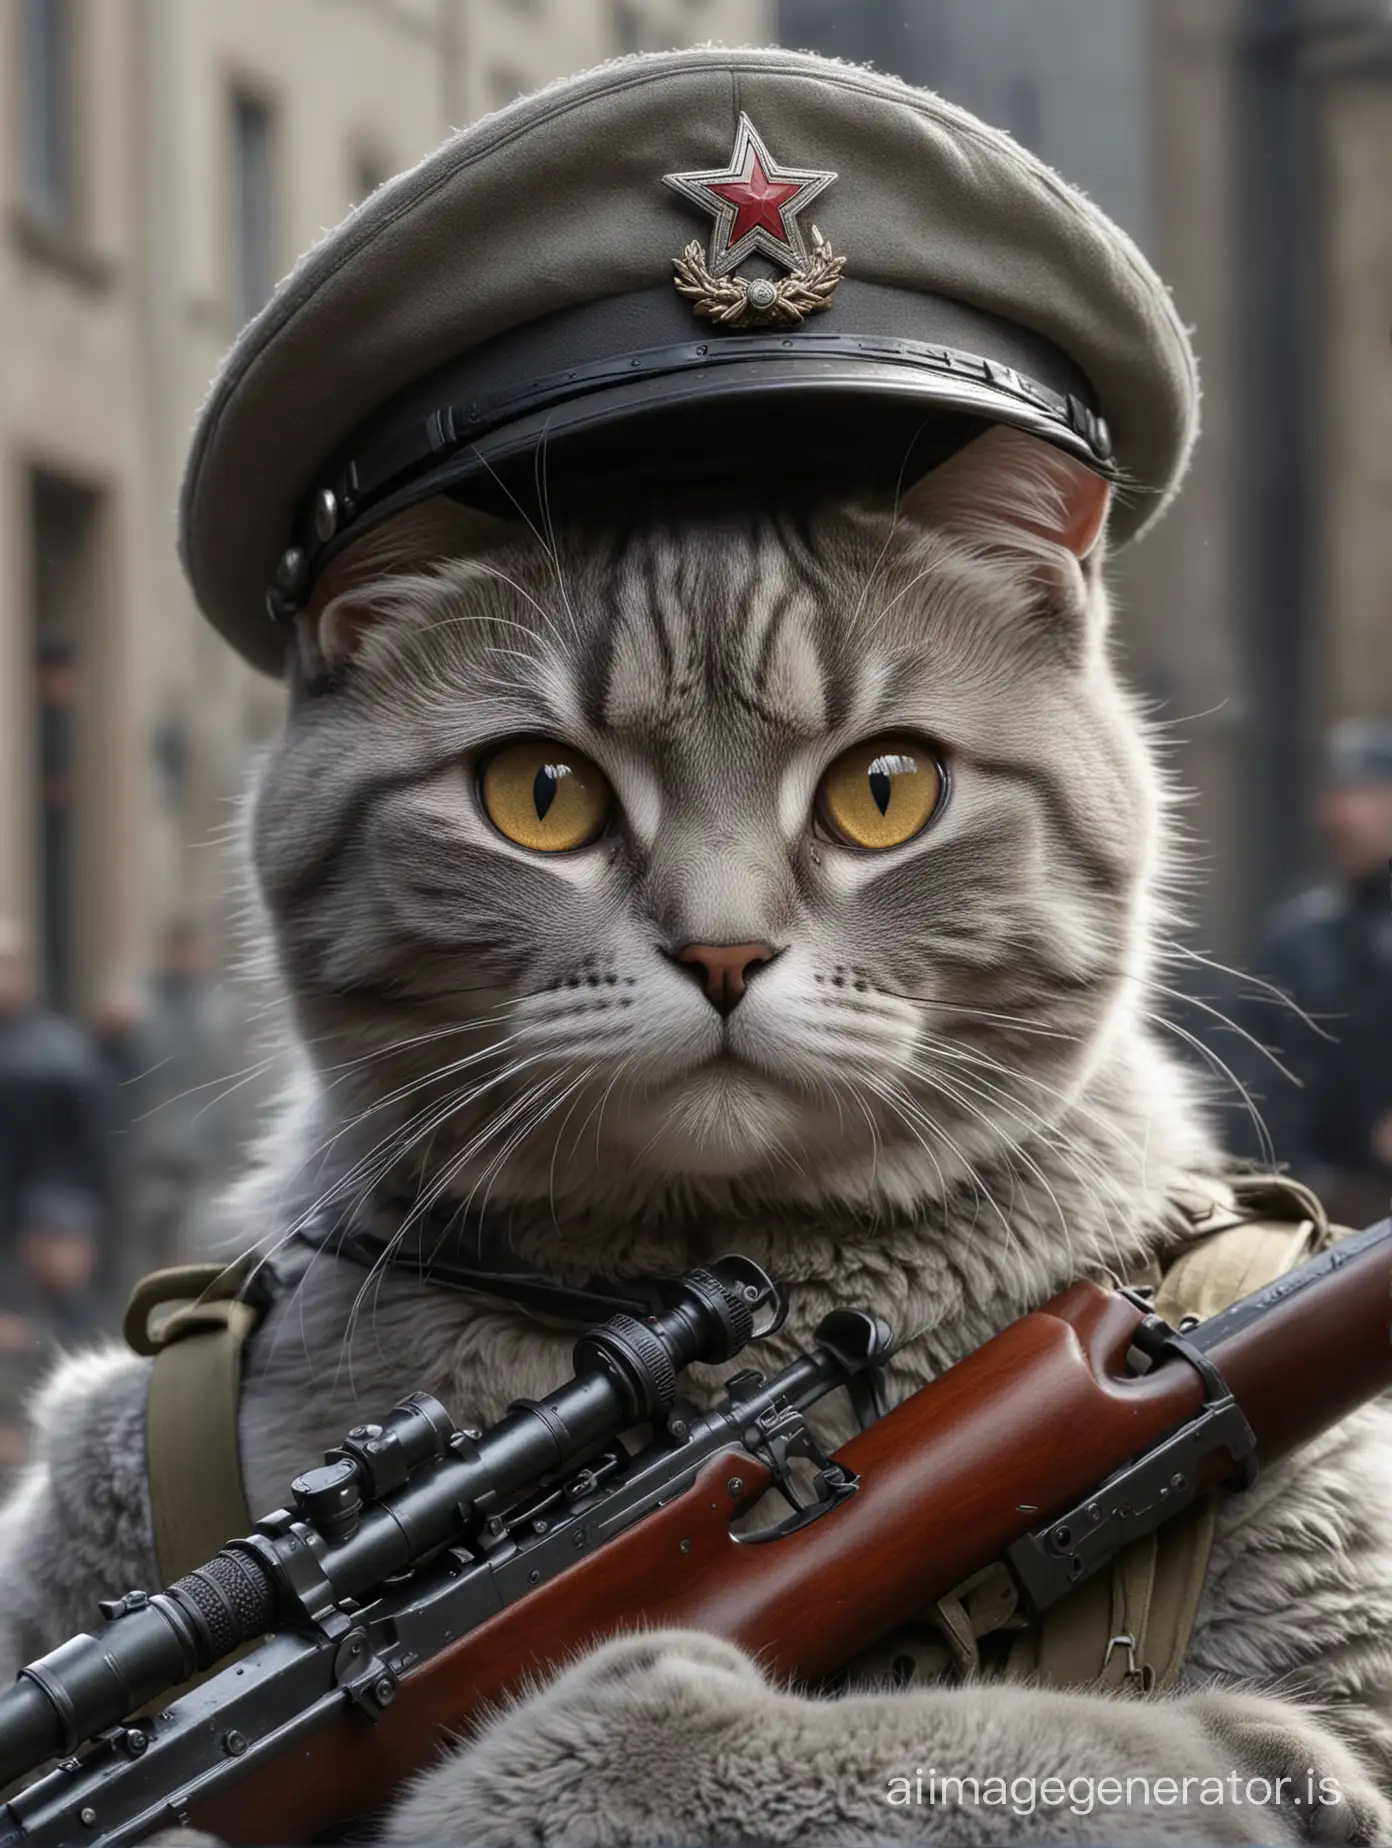 4k, realistic, HD. Soviet officer 1944 style light grey grey eyed cat with mosin riffle in hand in Berlin 